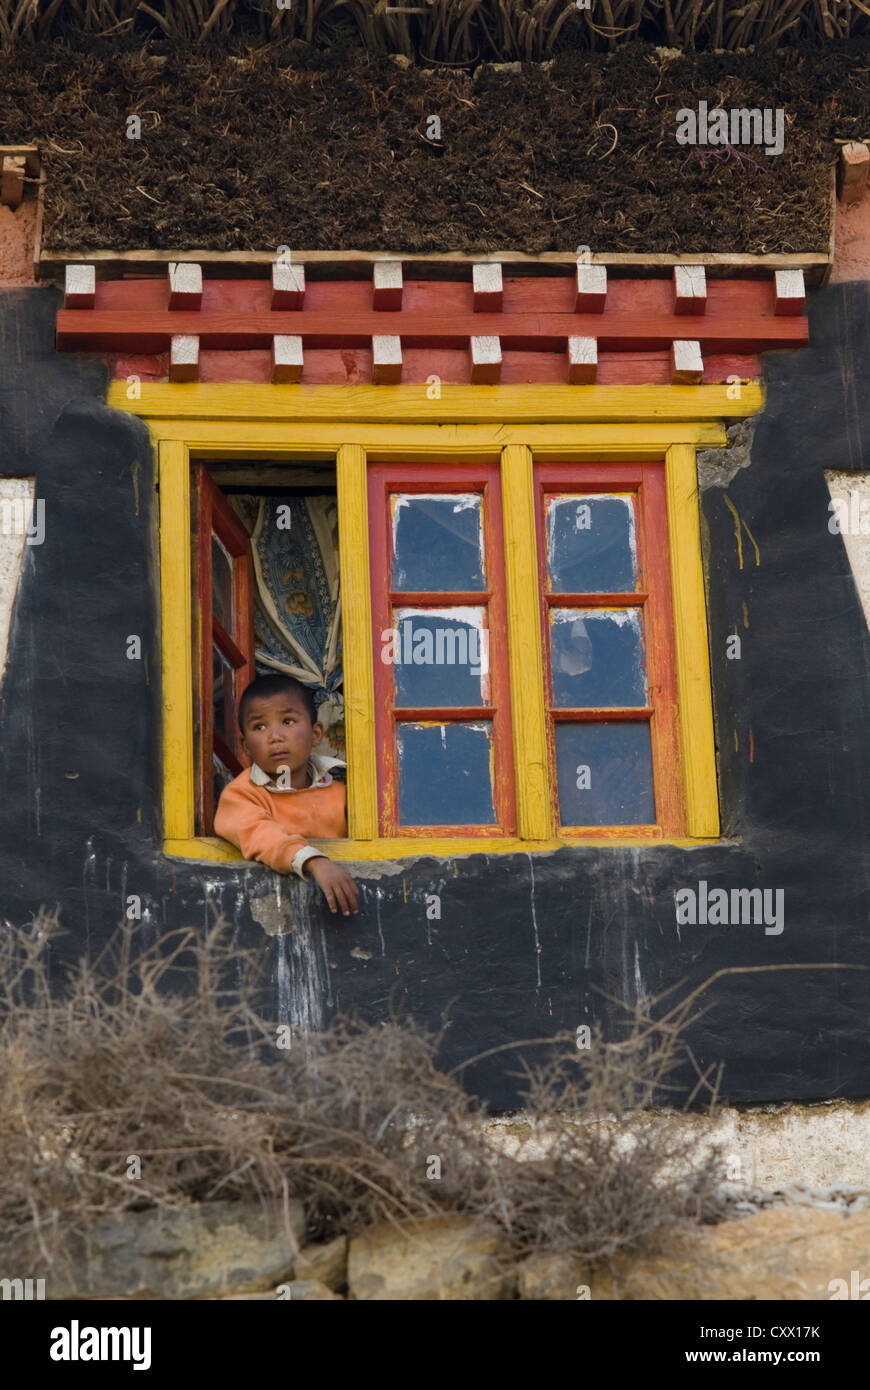 A young boy looks out from a window in Kibber village, Spiti, Northern India Stock Photo